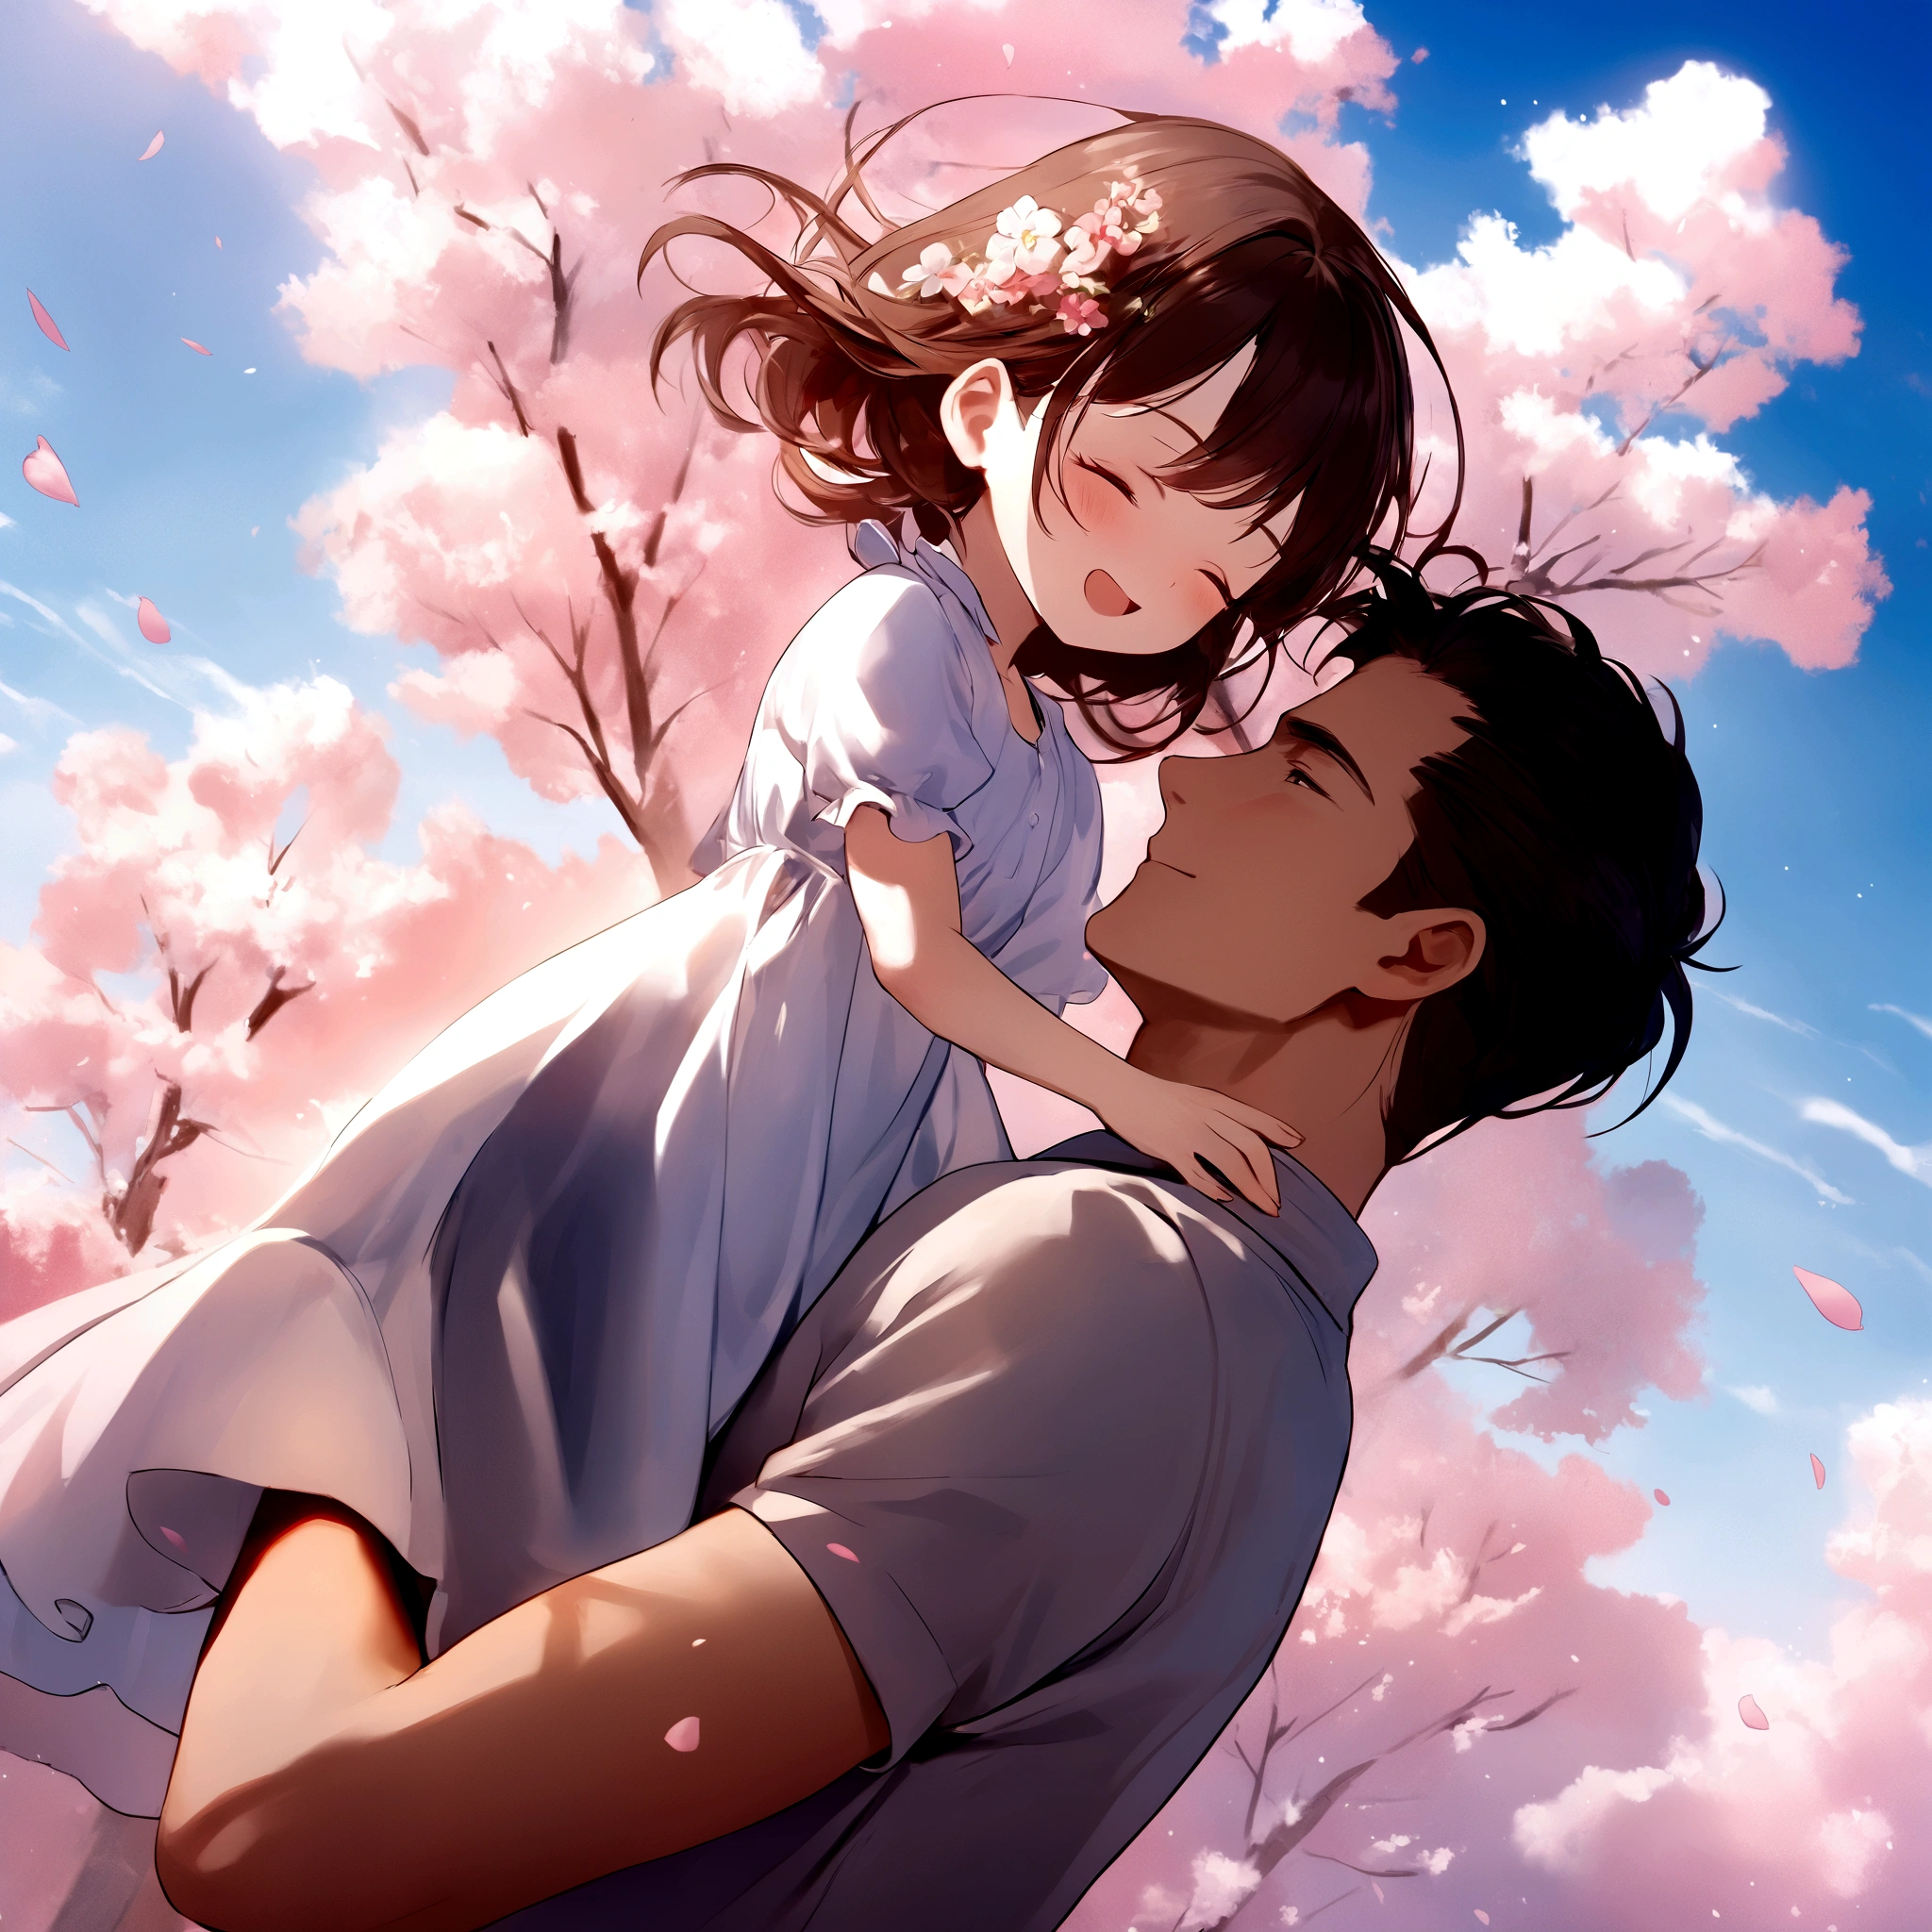 male\(young, energetic, dark hair,eyes closed with smile, mouth open, blue short-sleeved polo shirt, brown pants\) is (holding child:1.5) over the clothes,(you can see males hand:1.5), park, many petals dancing in air, colorful flowers in bloom, beautiful blue sky, beautiful clouds, BREAK ,quality\(8k,wallpaper of extremely detailed CG unit, ​masterpiece,hight resolution,top-quality,top-quality real texture skin,hyper realisitic,increase the resolution,RAW photos,best qualtiy,highly detailed,the wallpaper,cinematic lighting,ray trace,golden ratio\),[nsfw],dynamic angle,[nsfw],flom below